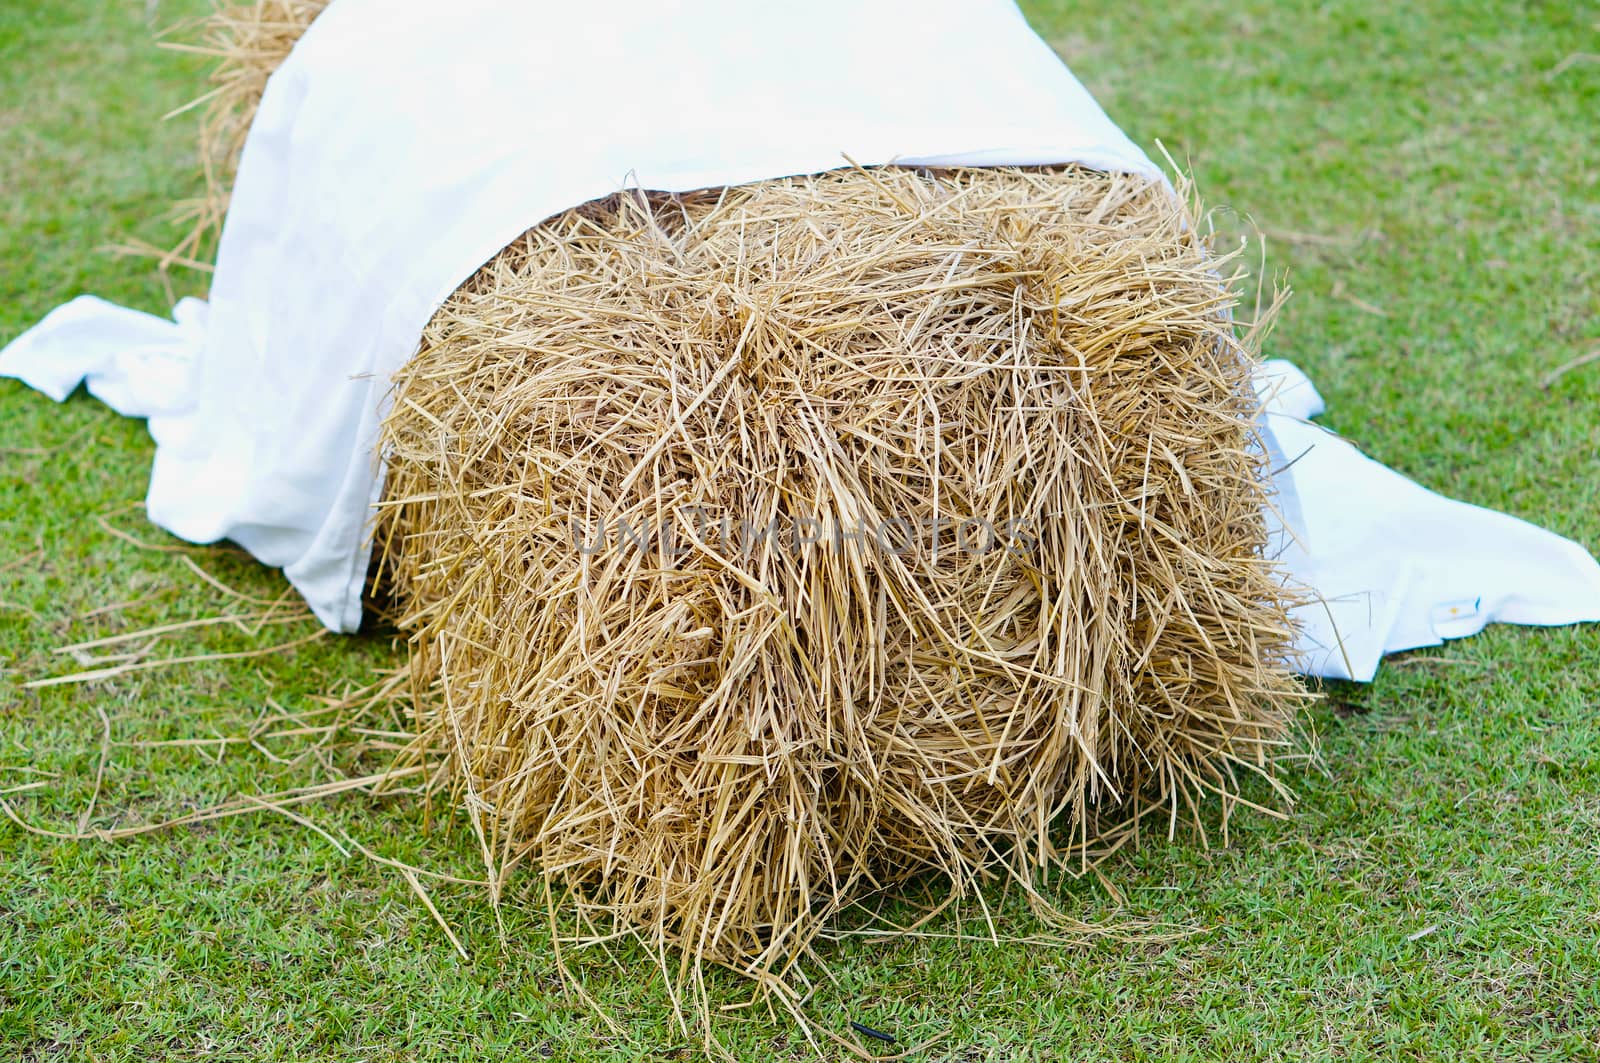 Pile of straw on grass background by ninun